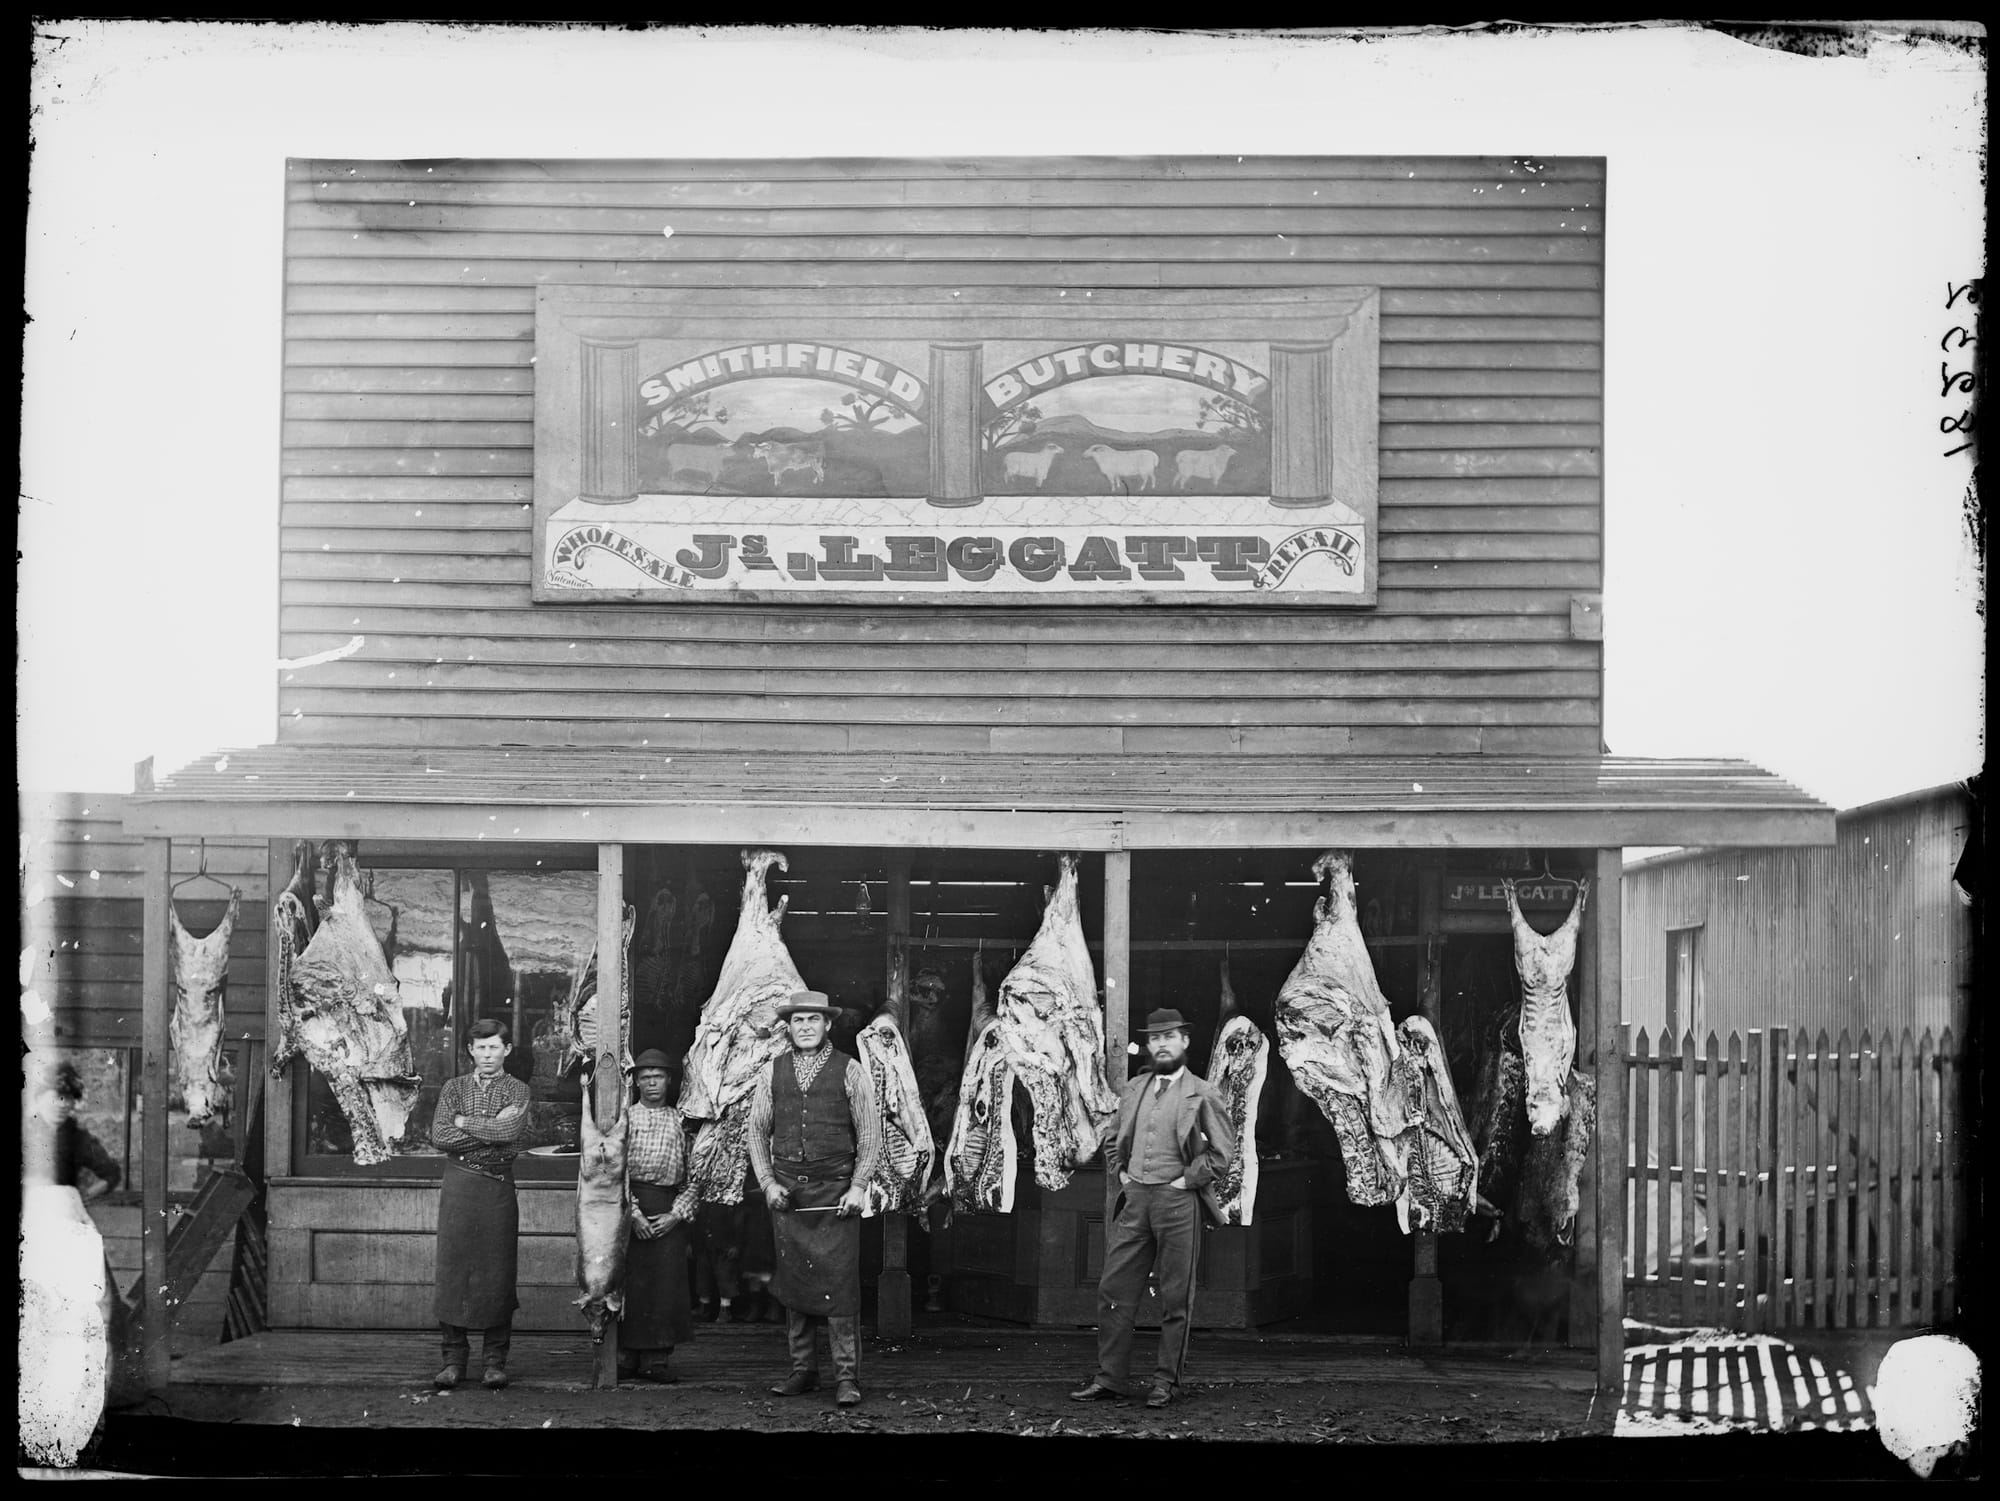 Three men standing in front of a butcher shop with carcasses hanging form the awning, and a sign mounted on the frontage above them.